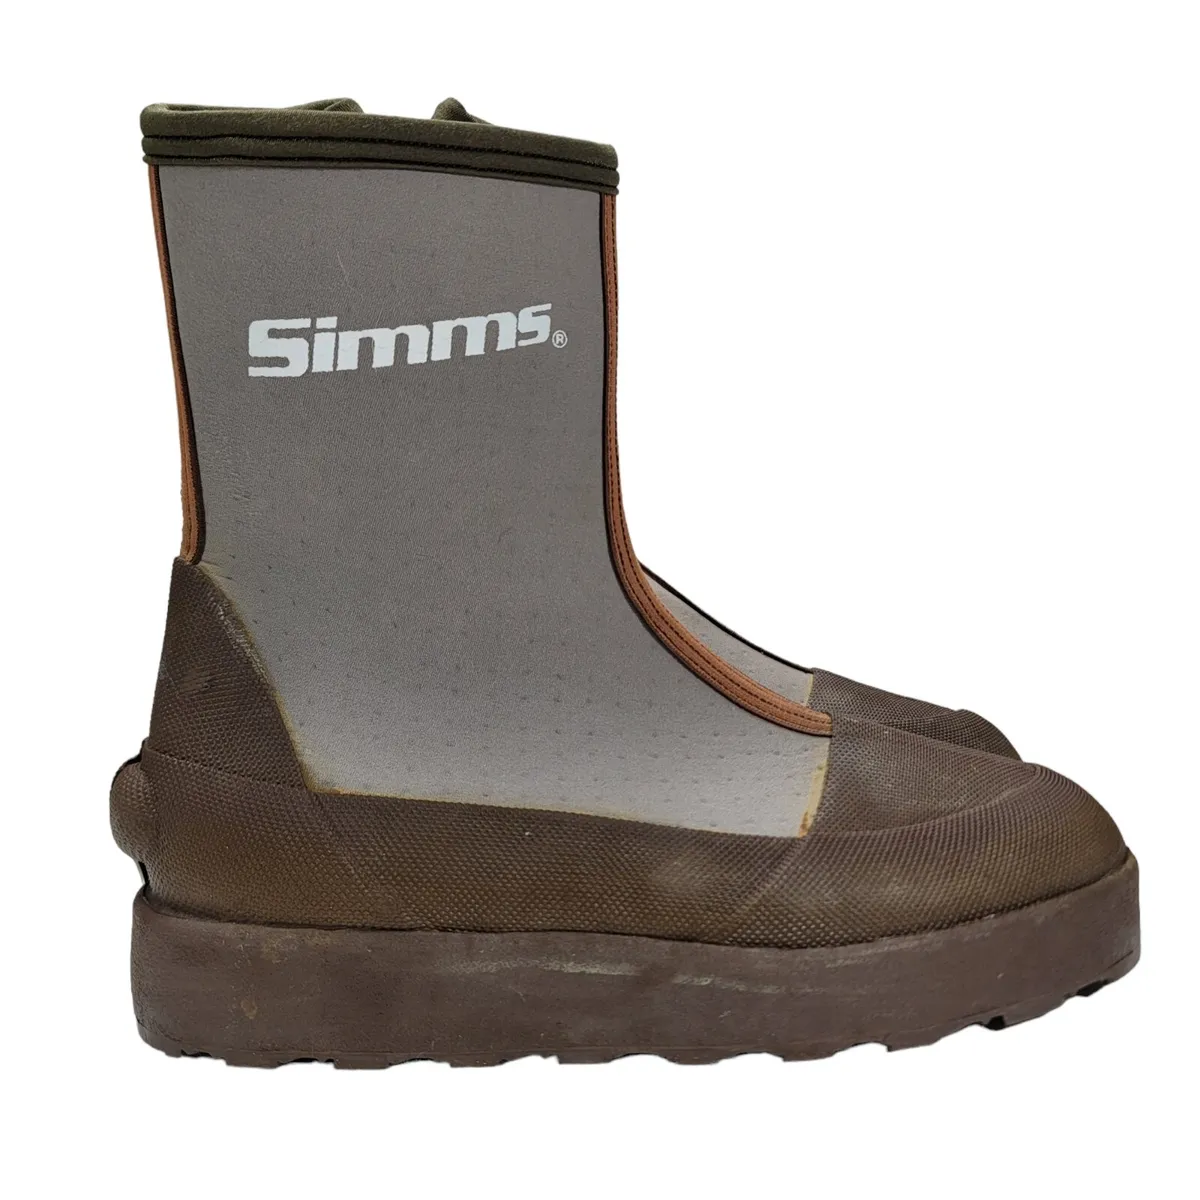 SIMMS Rubber Neoprene Side Zip Water Wading Boots Mens Size 6 Fishing  Outdoor